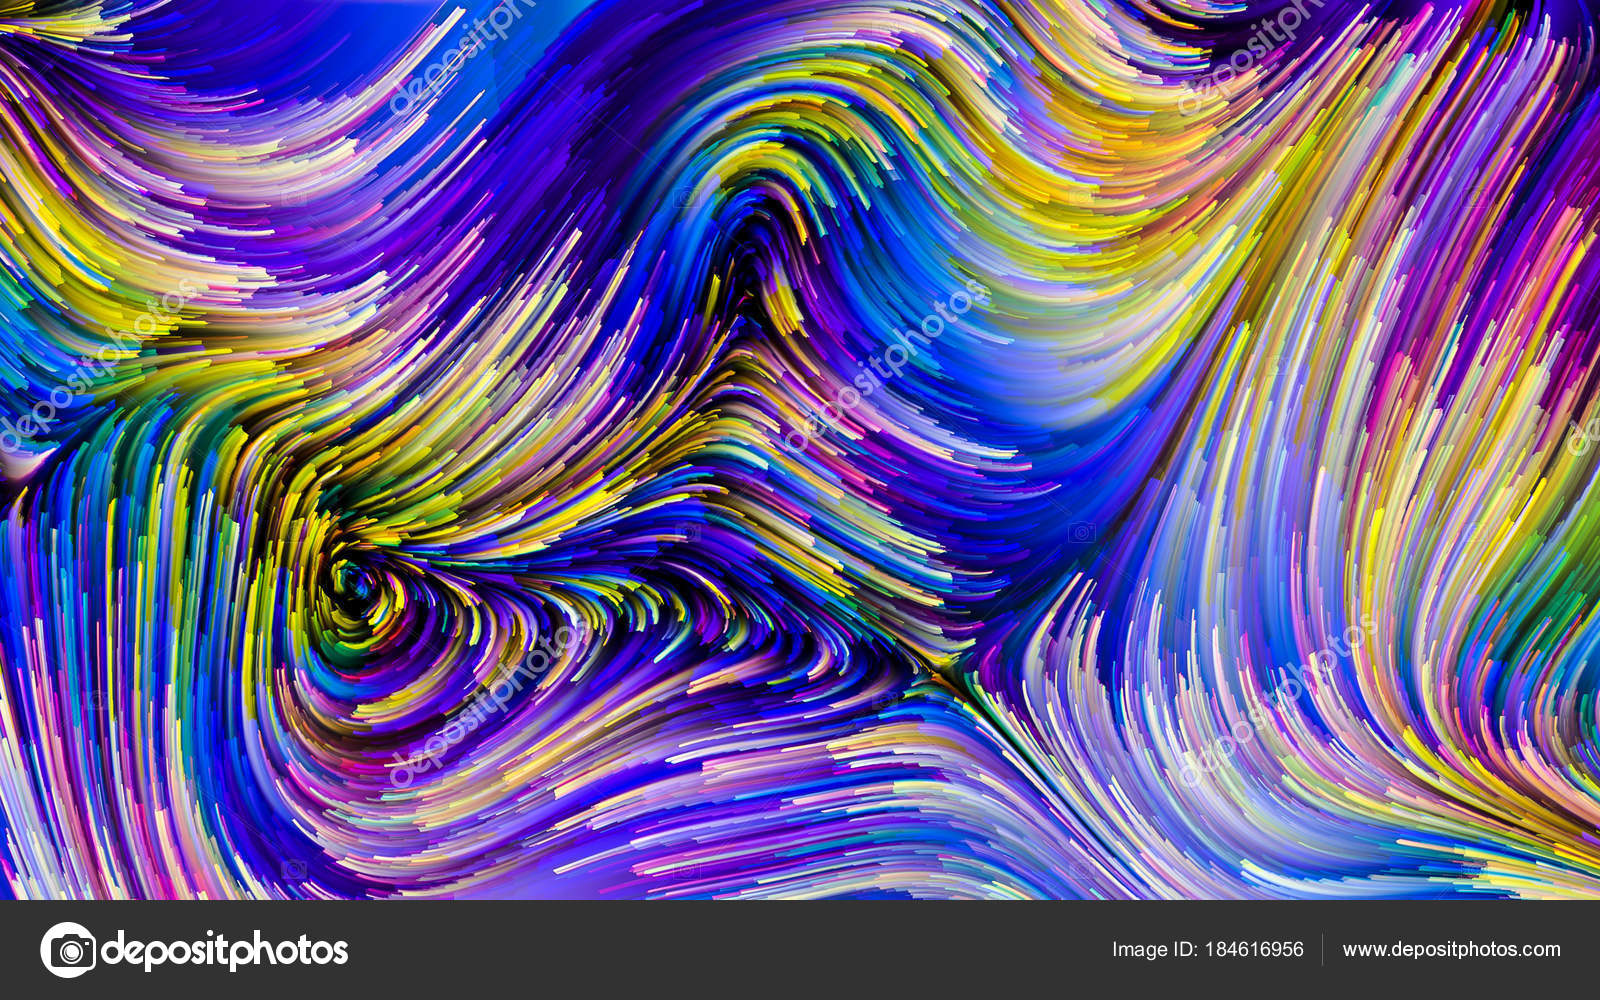 Artistic Abstraction Composed Of Flowing Paint Pattern - Vortex , HD Wallpaper & Backgrounds